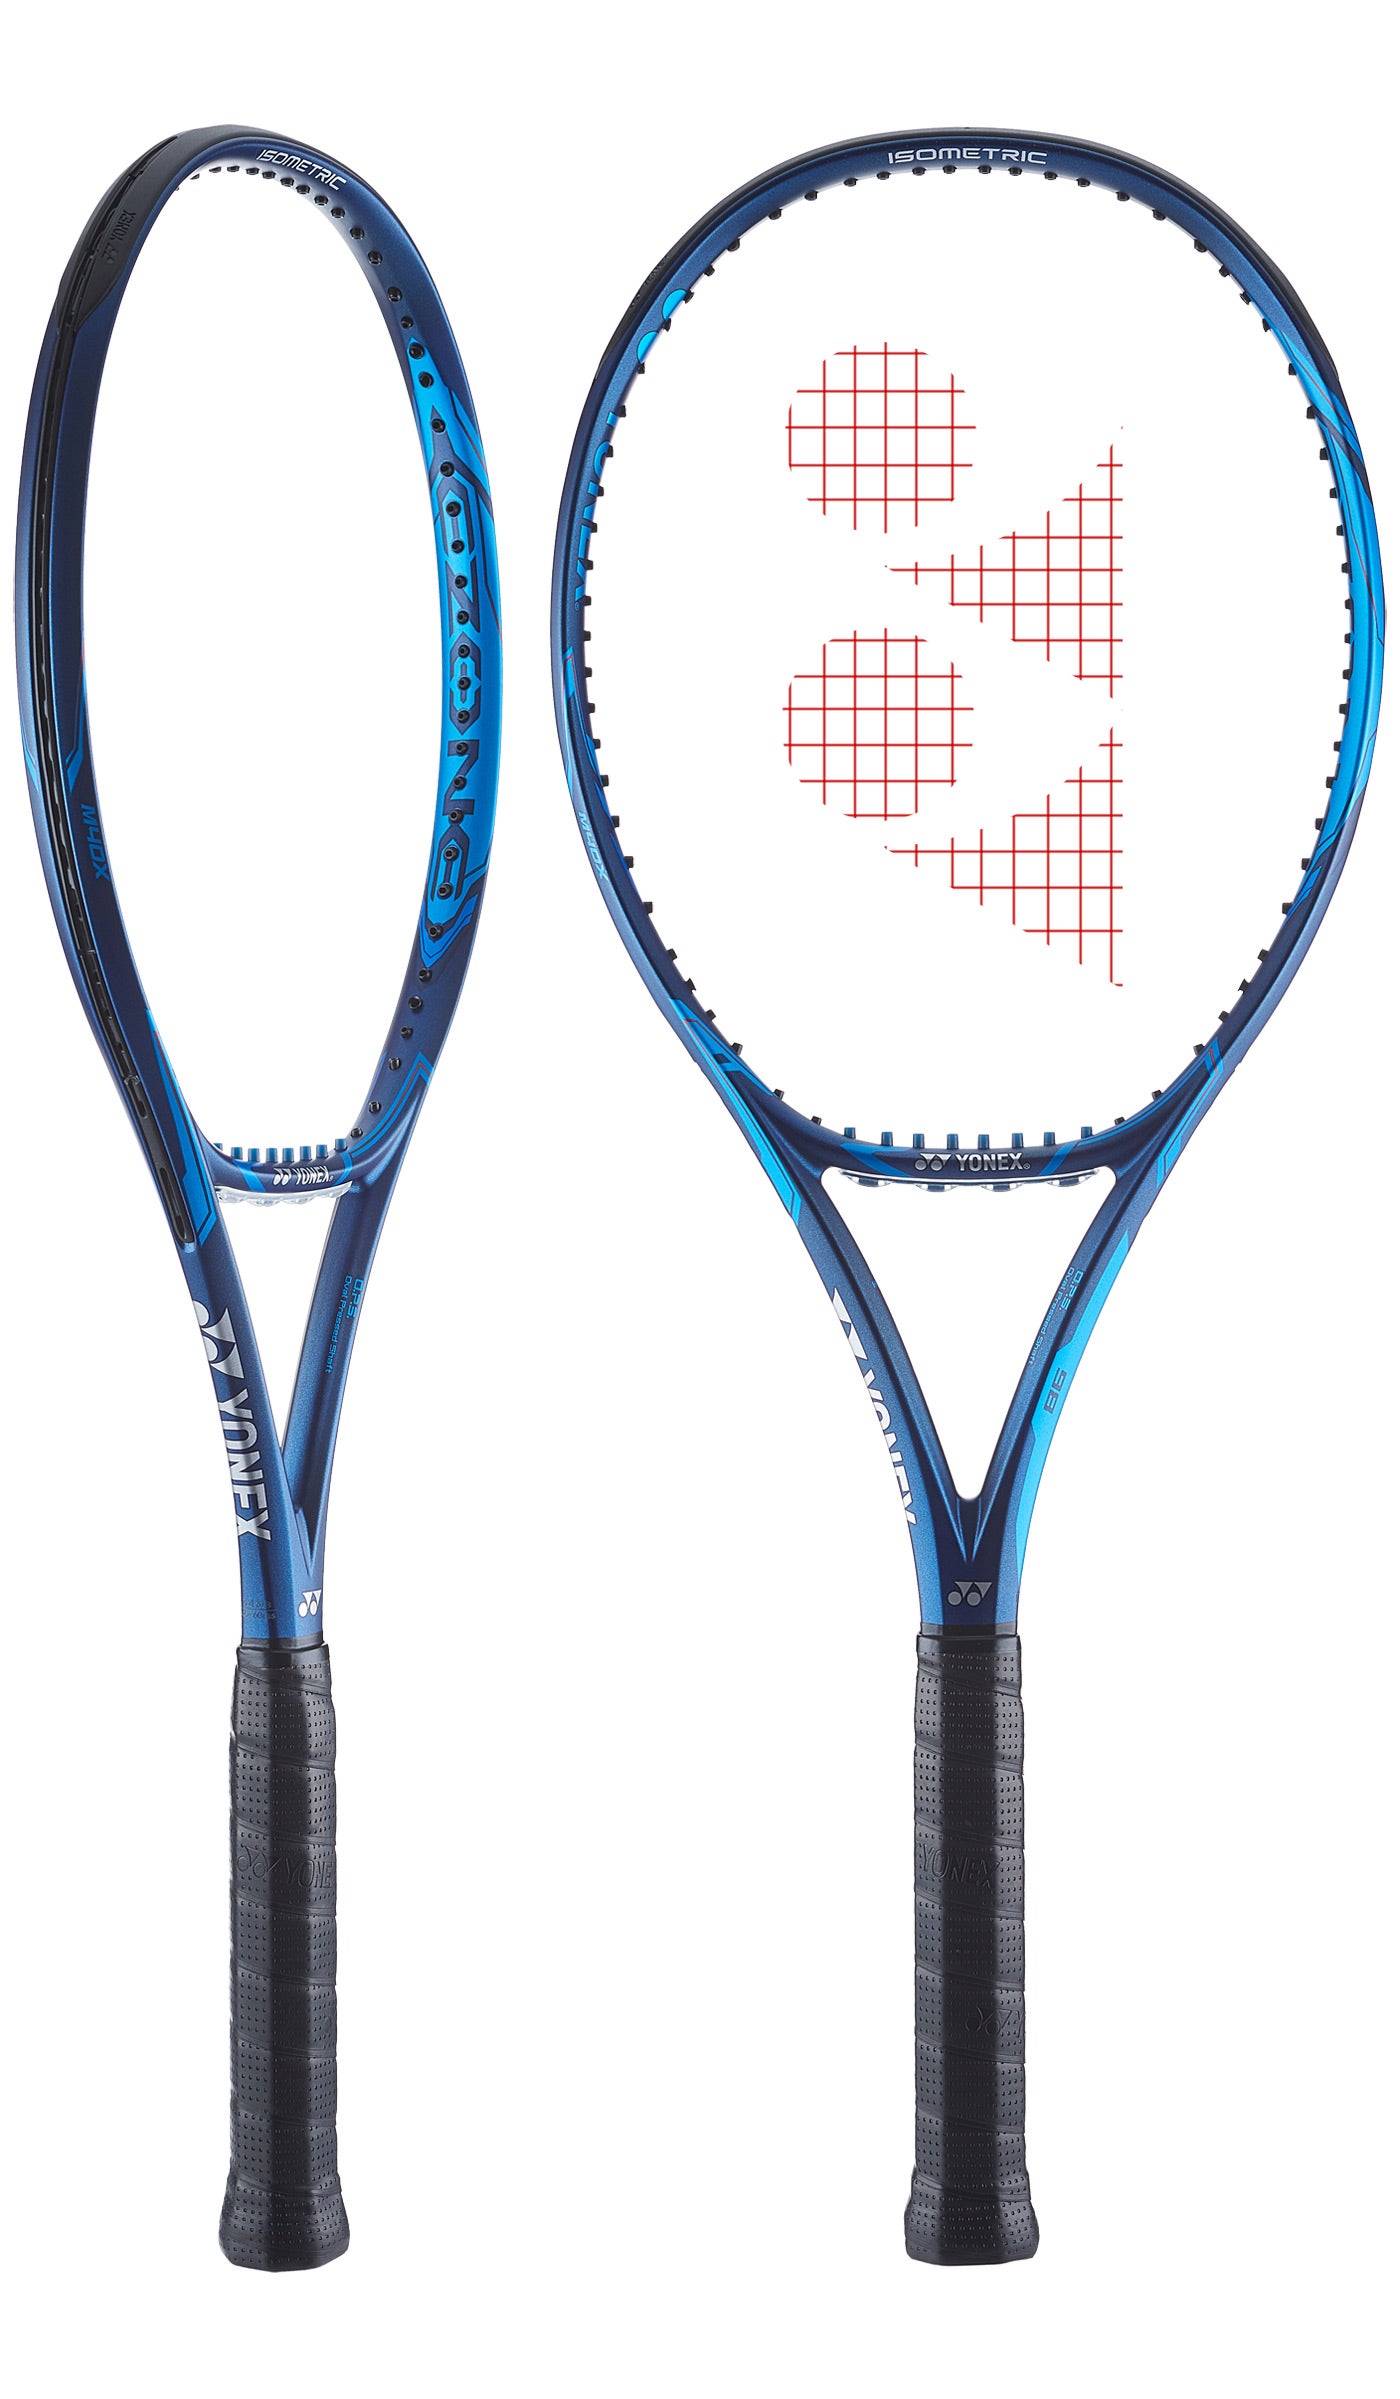 YONEX 2018 VCORE 98 Face 4 5/8 98 sq in 305 Flame Red Tennis Racquet Grip 5 